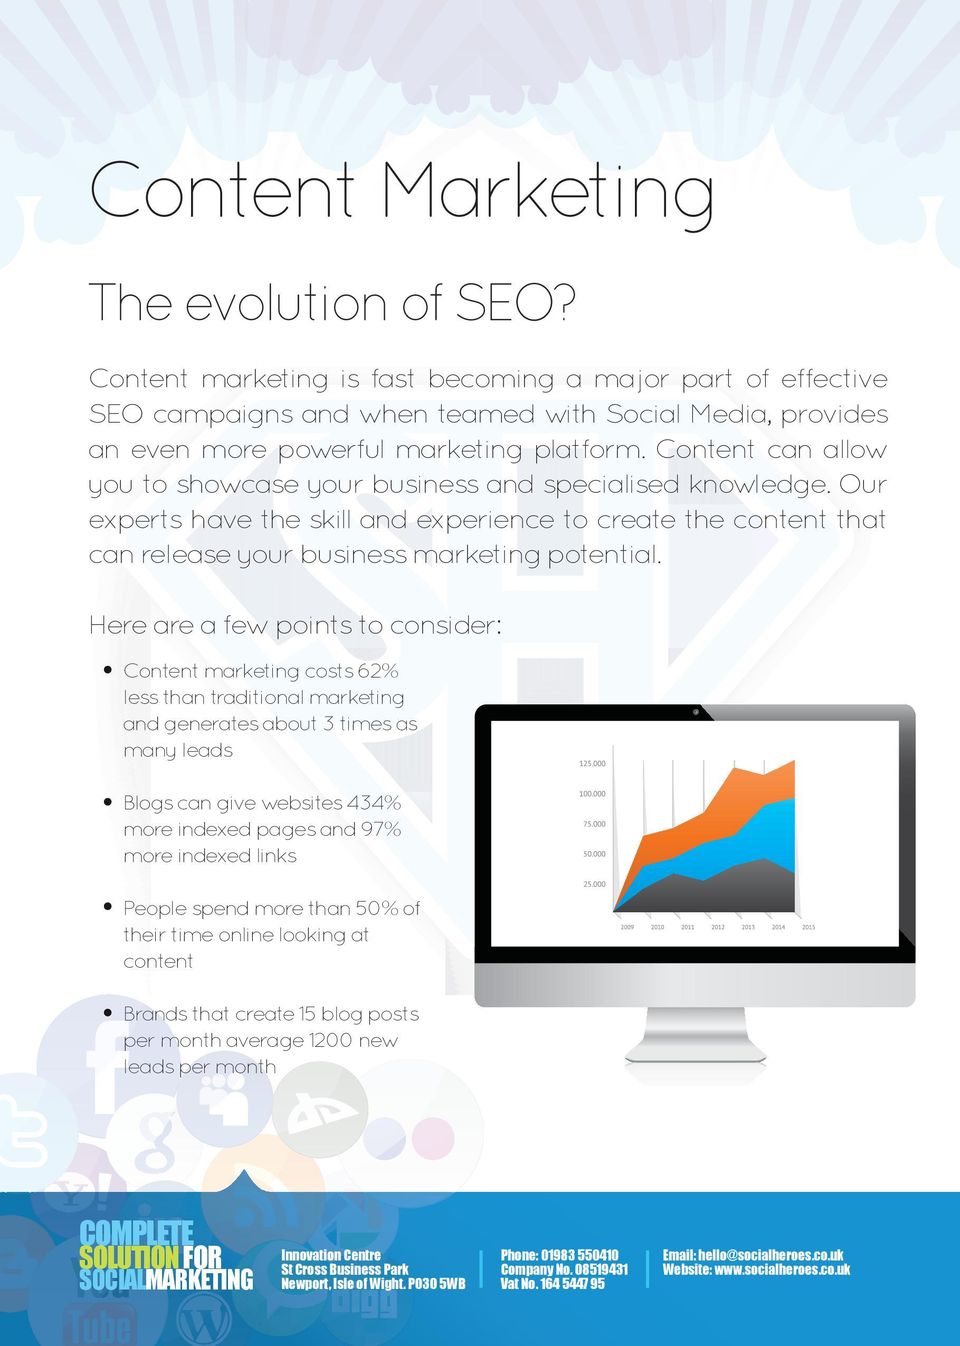 Content can allow you to showcase your business and specialised knowledge.